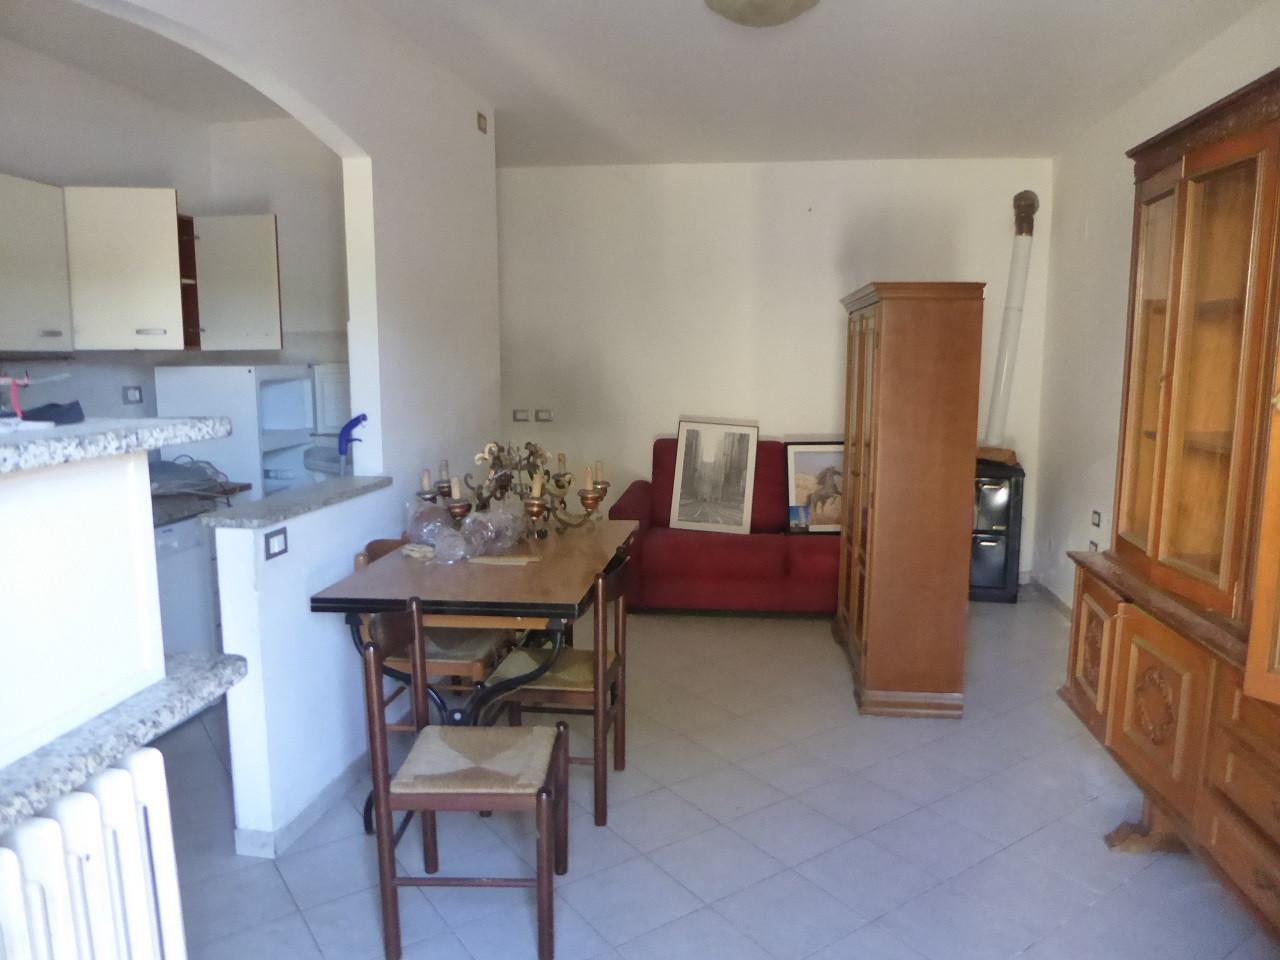 Apartment for sale, ref. MA3295